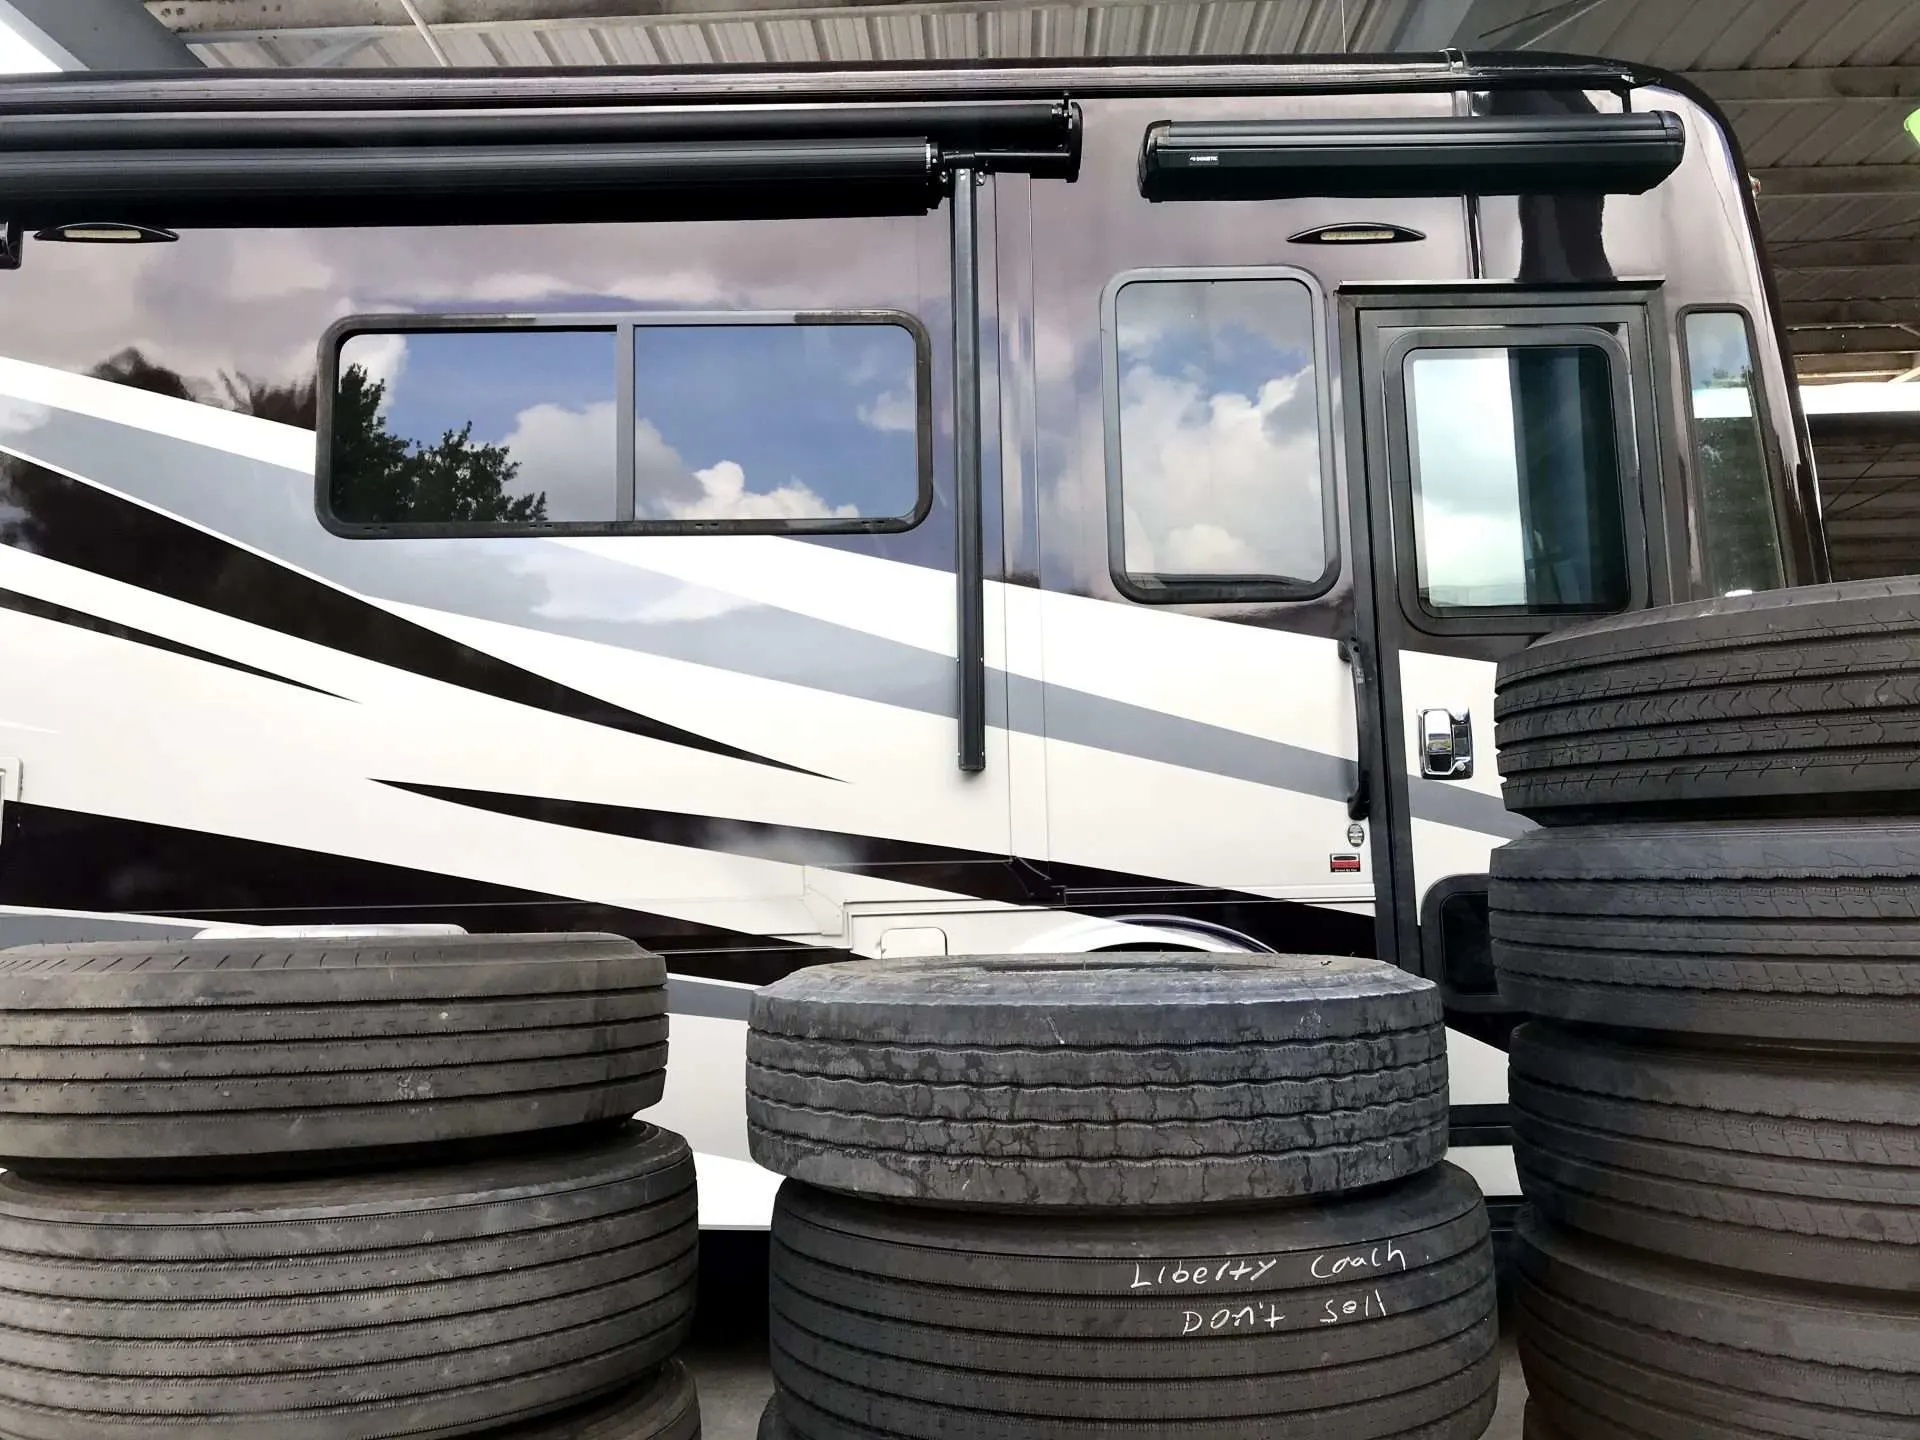 Class A RV at tire repair shop after blowout